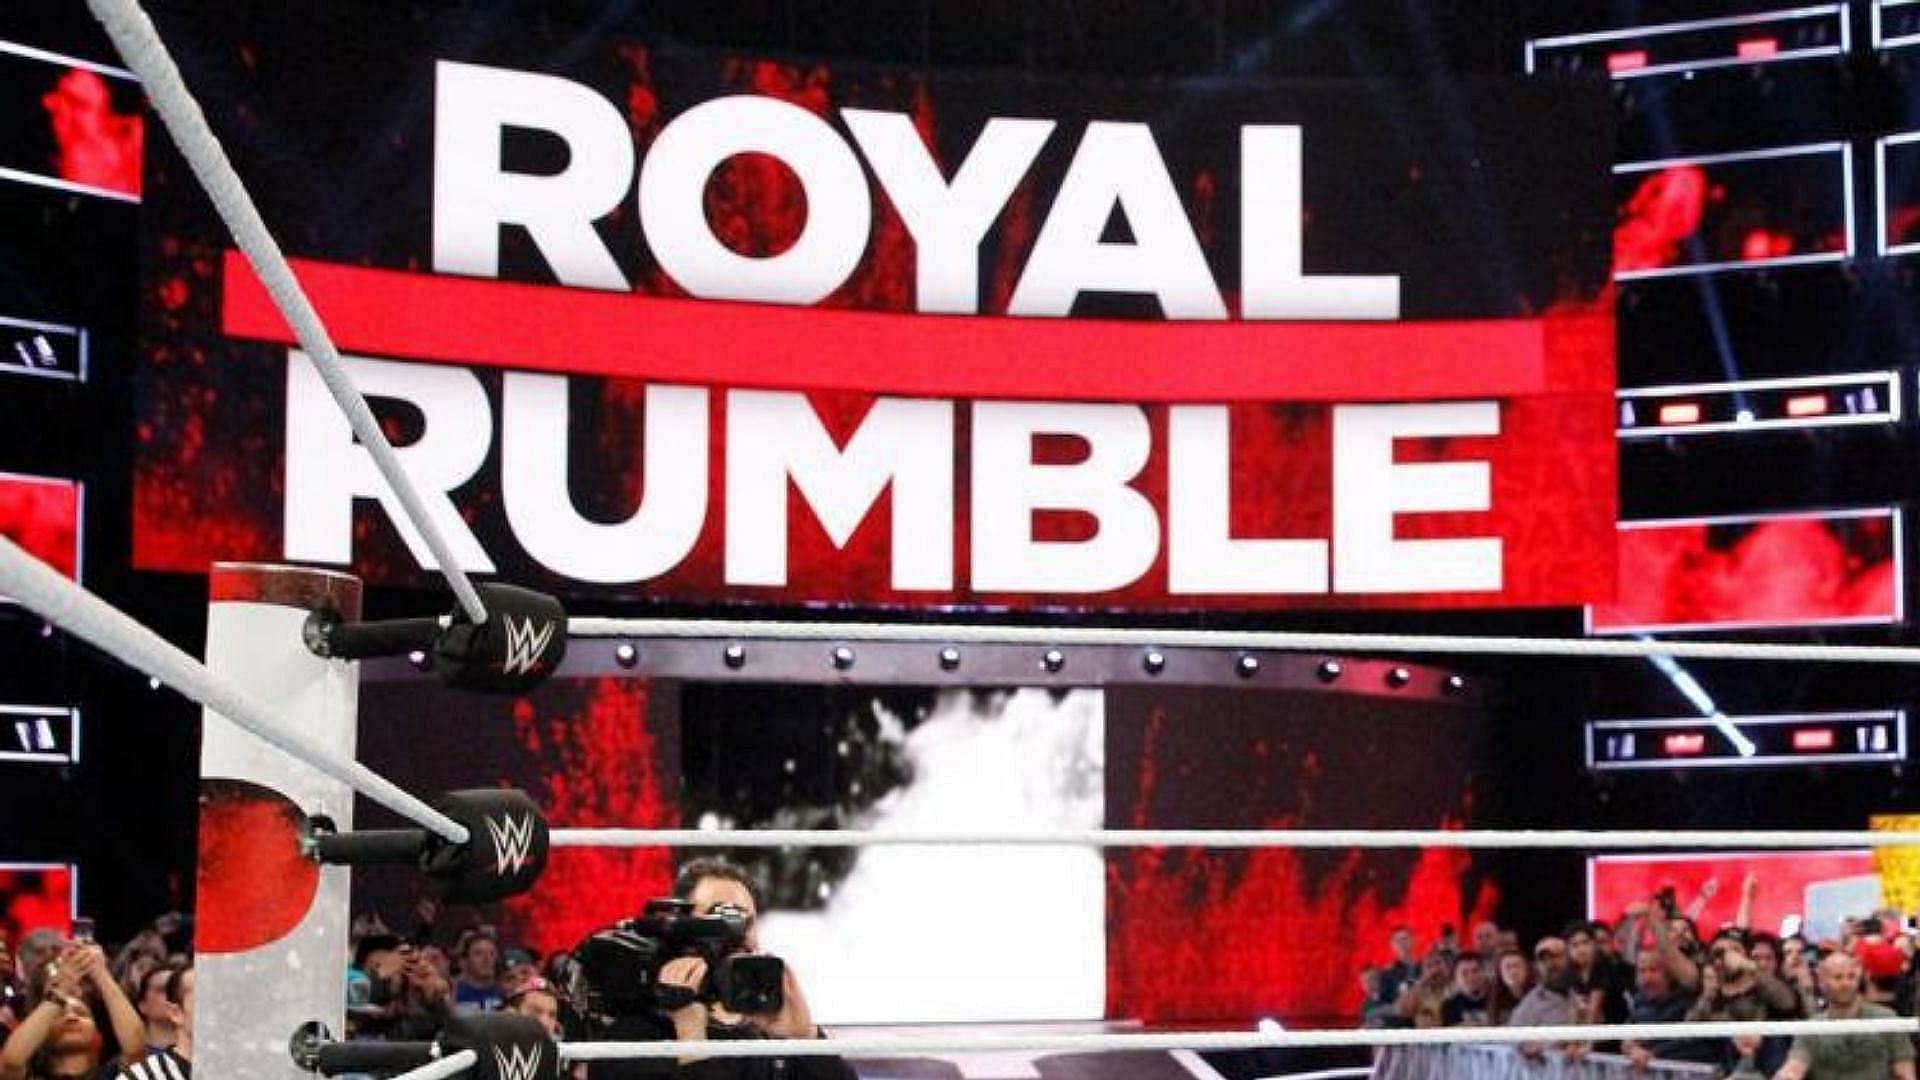 The WWE Royal Rumble is many fans